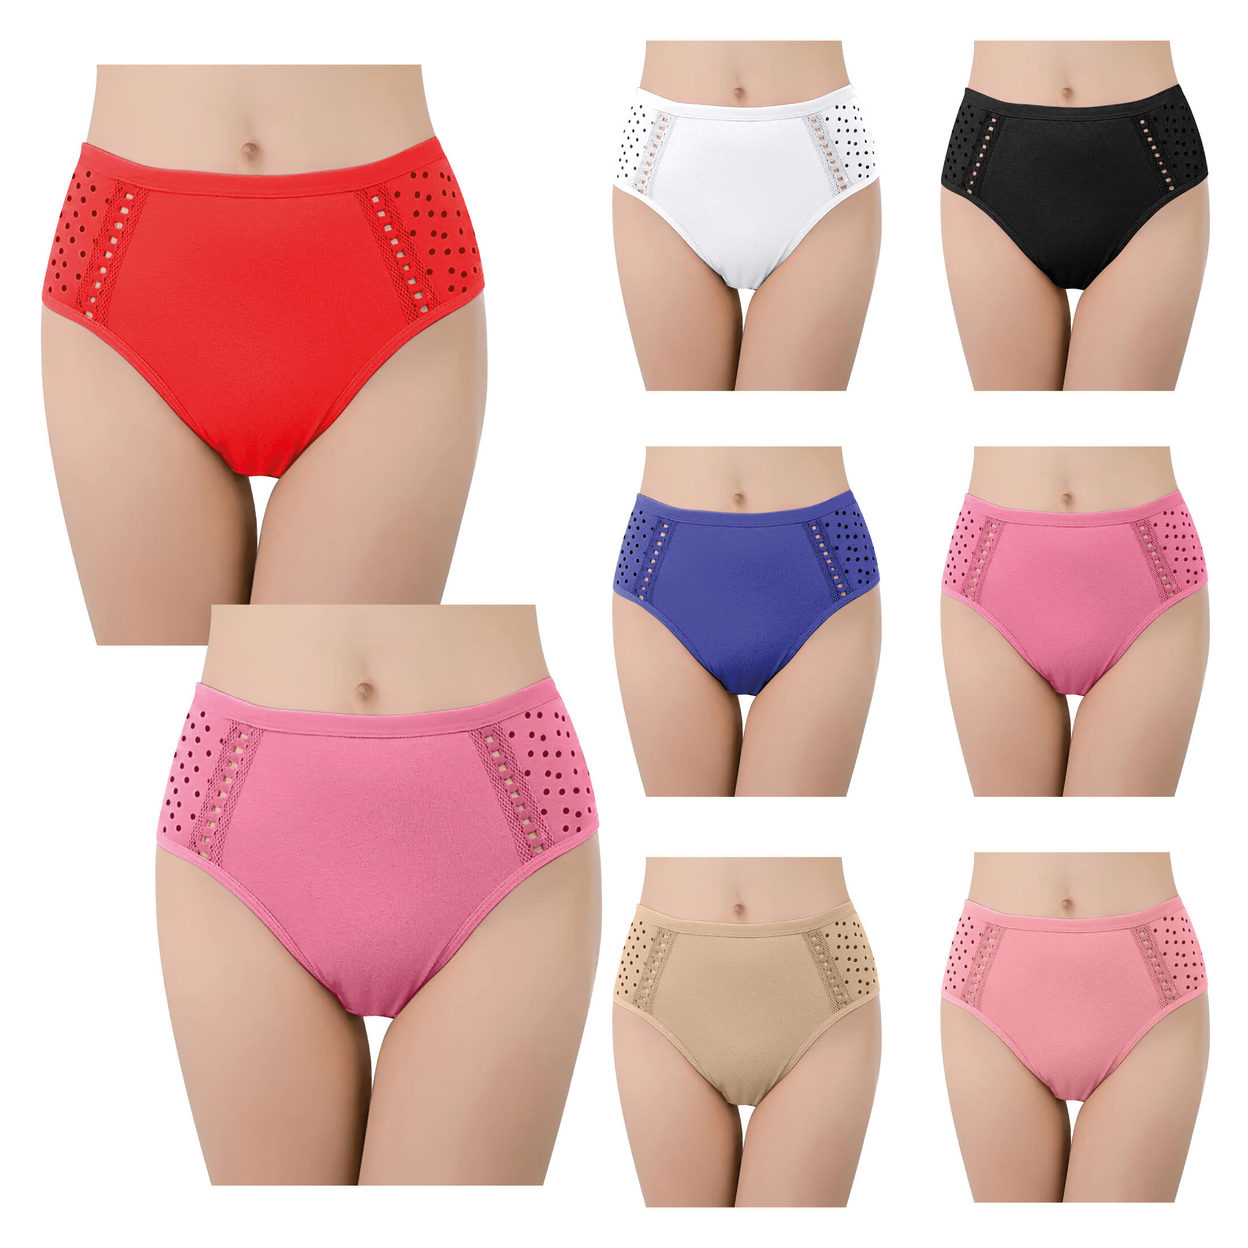 12-Pack: Women's Ultra Soft Moisture Wicking Panties Cotton Perfect Fit Underwear (Plus Sizes Available) - Large